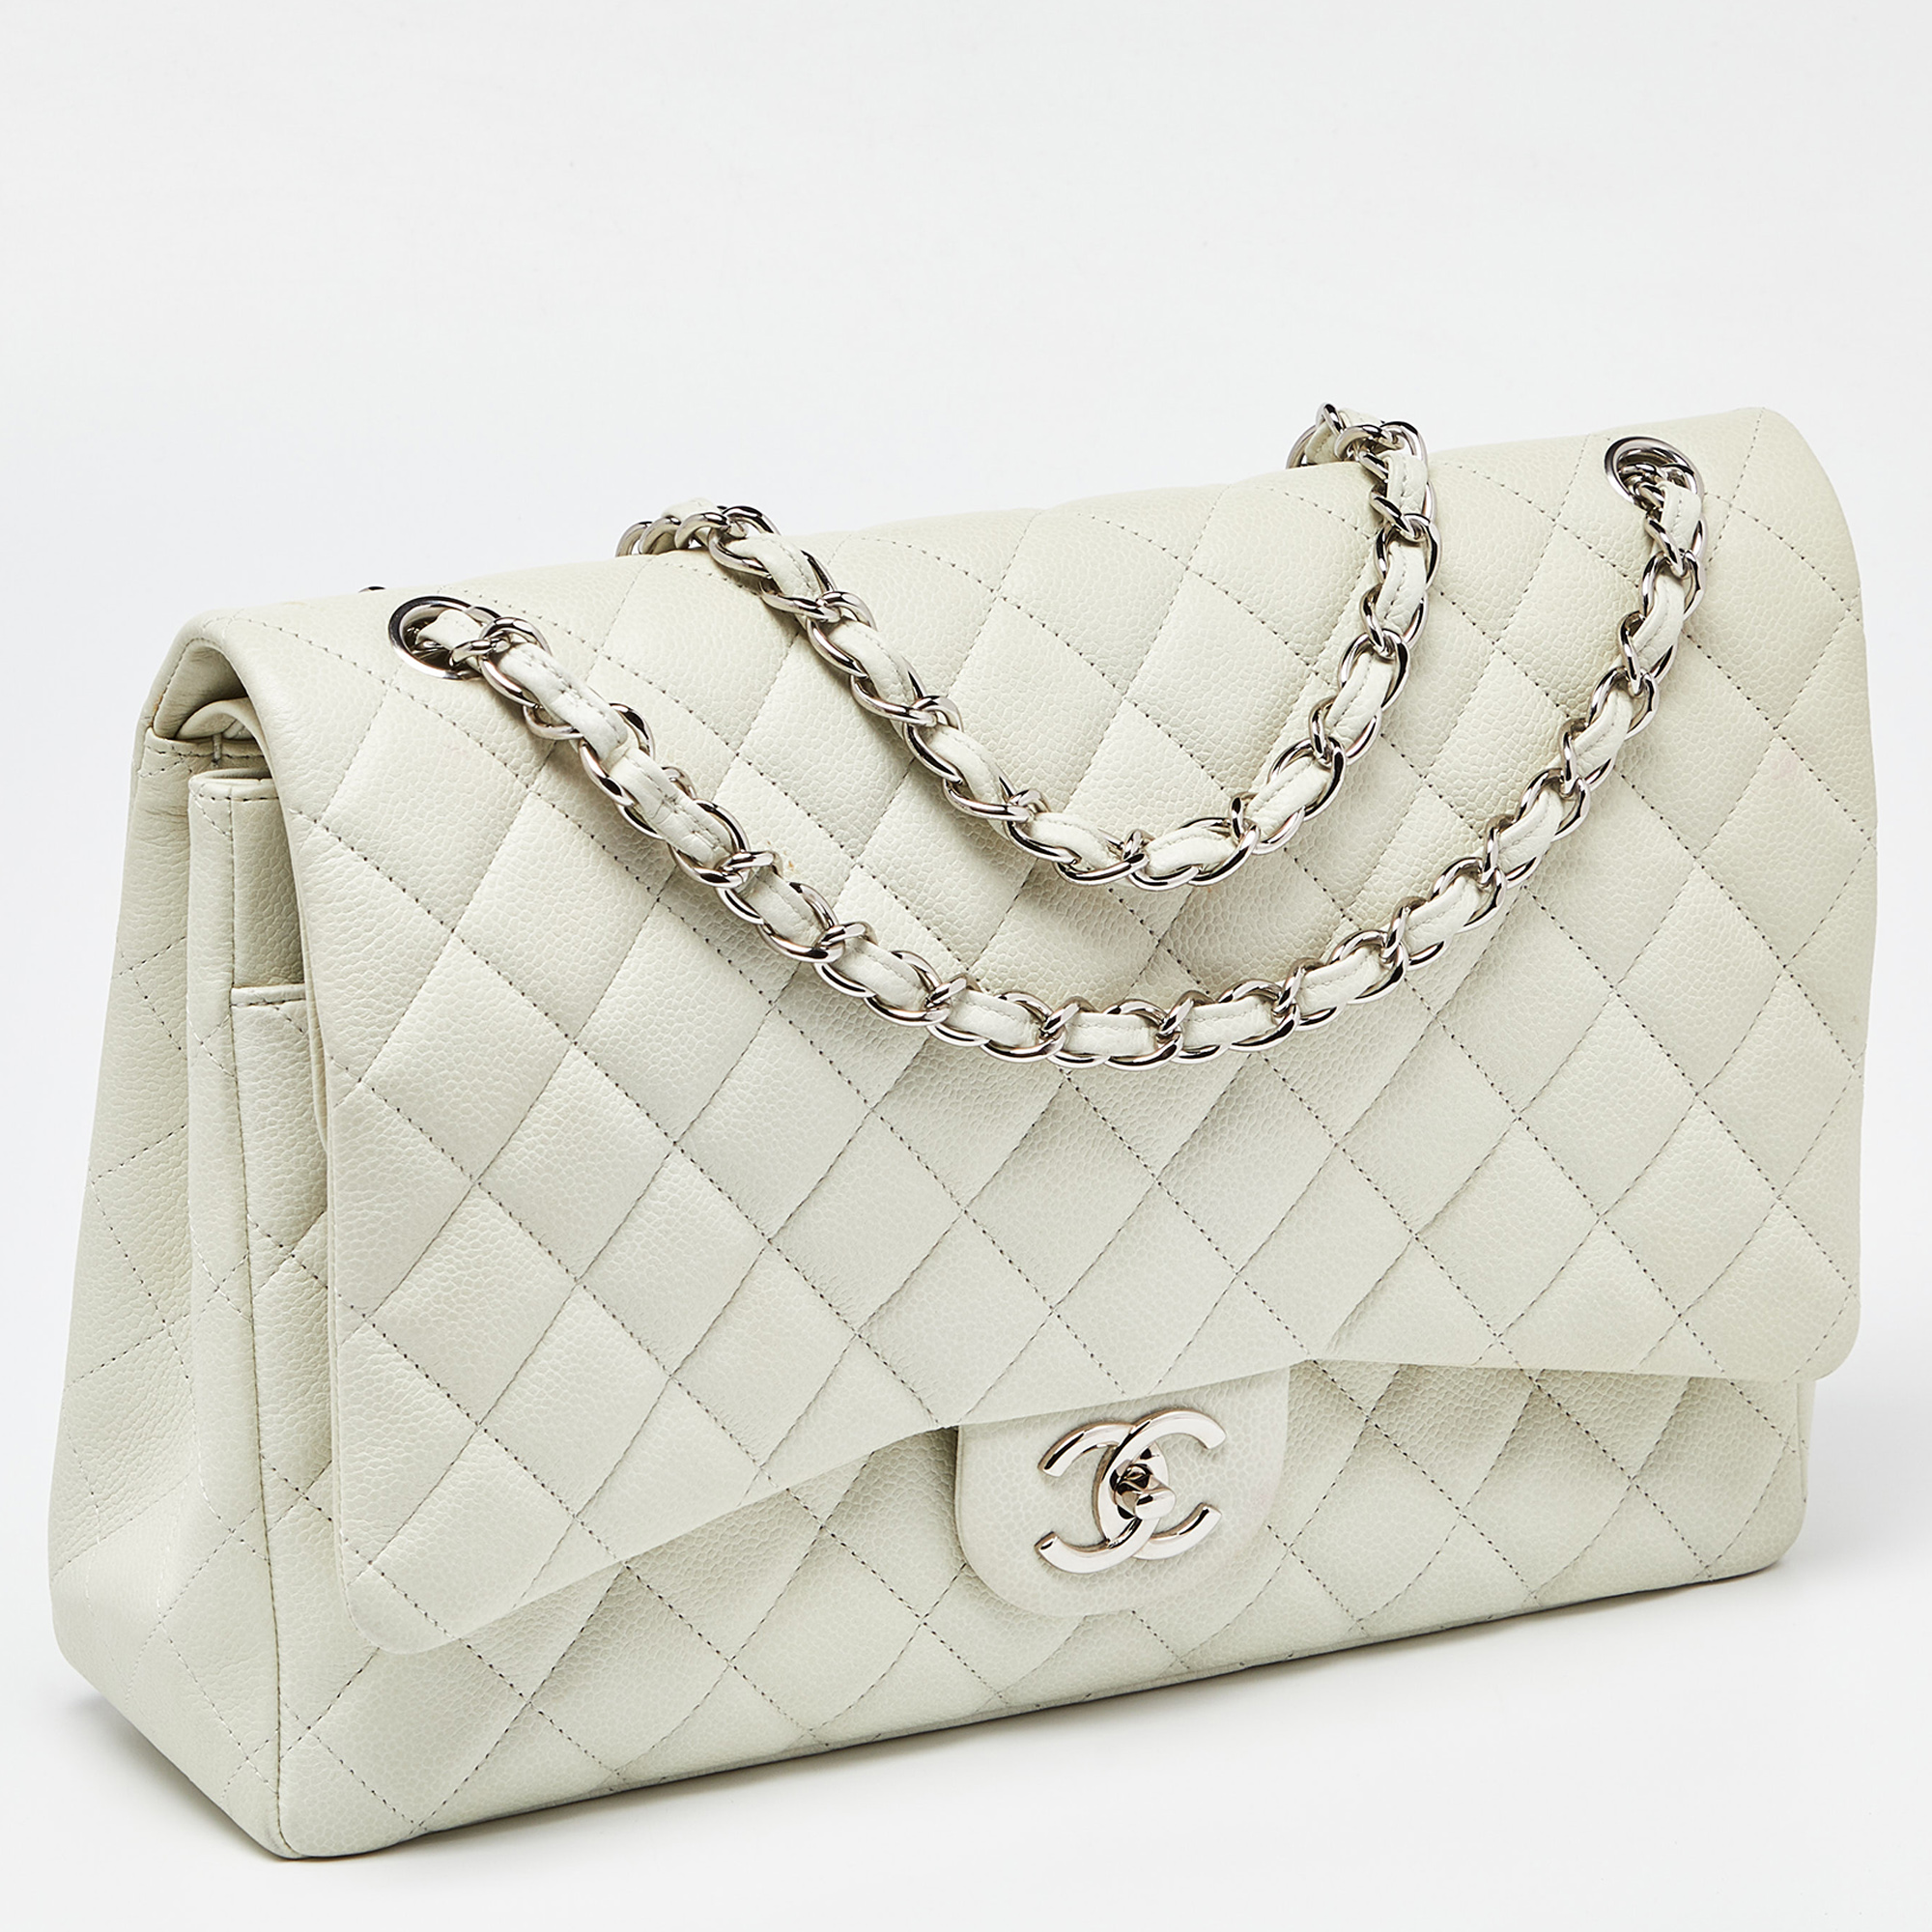 Chanel Off White Quilted Caviar Leather Maxi Classic Double Flap Bag